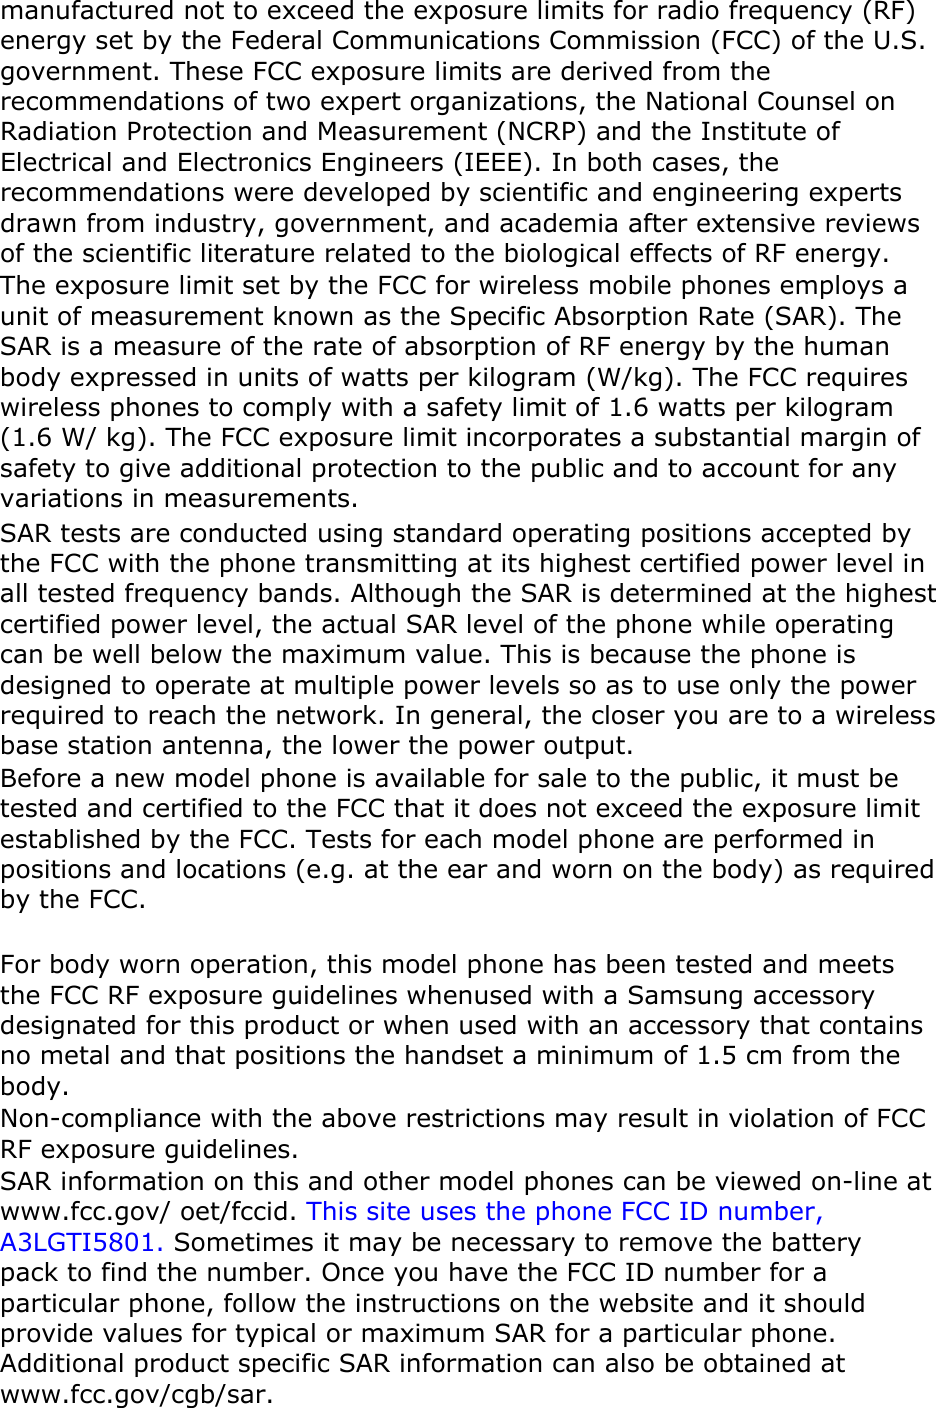 manufactured not to exceed the exposure limits for radio frequency (RF) energy set by the Federal Communications Commission (FCC) of the U.S. government. These FCC exposure limits are derived from the recommendations of two expert organizations, the National Counsel on Radiation Protection and Measurement (NCRP) and the Institute of Electrical and Electronics Engineers (IEEE). In both cases, the recommendations were developed by scientific and engineering experts drawn from industry, government, and academia after extensive reviews of the scientific literature related to the biological effects of RF energy. The exposure limit set by the FCC for wireless mobile phones employs a unit of measurement known as the Specific Absorption Rate (SAR). The SAR is a measure of the rate of absorption of RF energy by the human body expressed in units of watts per kilogram (W/kg). The FCC requires wireless phones to comply with a safety limit of 1.6 watts per kilogram (1.6 W/ kg). The FCC exposure limit incorporates a substantial margin of safety to give additional protection to the public and to account for any variations in measurements. SAR tests are conducted using standard operating positions accepted by the FCC with the phone transmitting at its highest certified power level in all tested frequency bands. Although the SAR is determined at the highest certified power level, the actual SAR level of the phone while operating can be well below the maximum value. This is because the phone is designed to operate at multiple power levels so as to use only the power required to reach the network. In general, the closer you are to a wireless base station antenna, the lower the power output. Before a new model phone is available for sale to the public, it must be tested and certified to the FCC that it does not exceed the exposure limit established by the FCC. Tests for each model phone are performed in positions and locations (e.g. at the ear and worn on the body) as required by the FCC.      For body worn operation, this model phone has been tested and meets the FCC RF exposure guidelines whenused with a Samsung accessory designated for this product or when used with an accessory that contains no metal and that positions the handset a minimum of 1.5 cm from the body.  Non-compliance with the above restrictions may result in violation of FCC RF exposure guidelines. SAR information on this and other model phones can be viewed on-line at www.fcc.gov/ oet/fccid. This site uses the phone FCC ID number, A3LGTI5801. Sometimes it may be necessary to remove the battery pack to find the number. Once you have the FCC ID number for a particular phone, follow the instructions on the website and it should provide values for typical or maximum SAR for a particular phone. Additional product specific SAR information can also be obtained at www.fcc.gov/cgb/sar. 